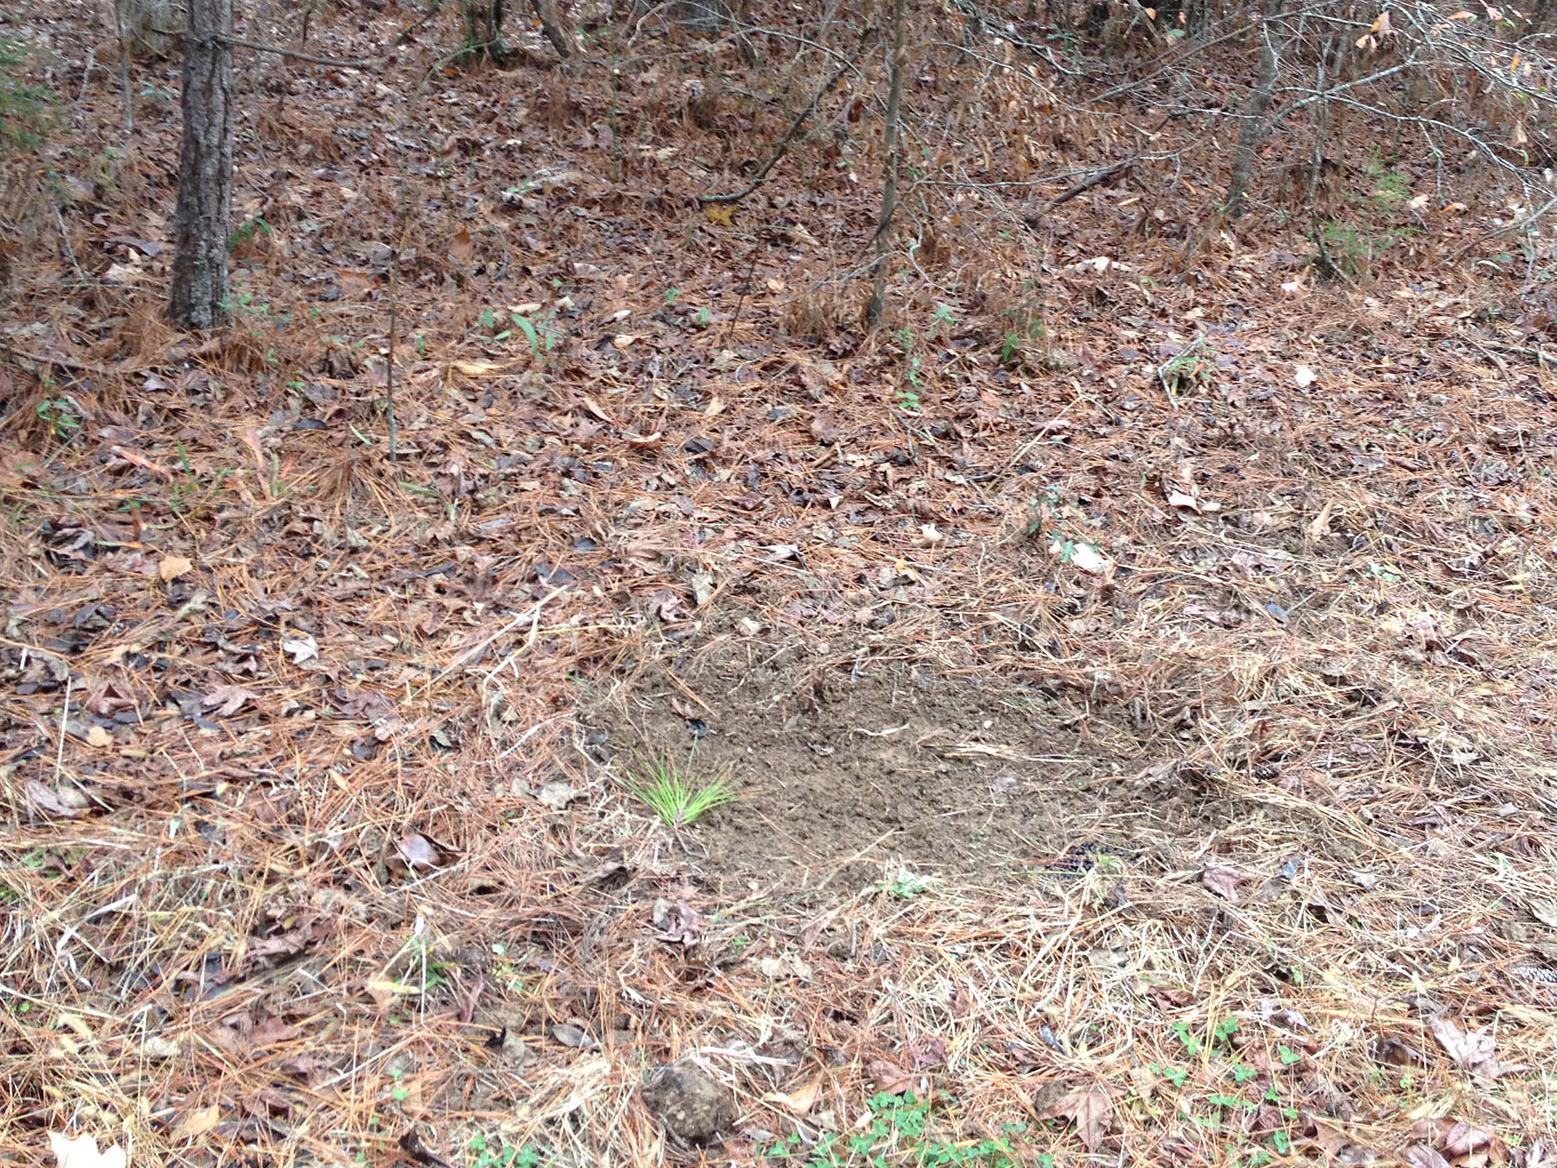 Dry leaves and pine straw are cleared away in a round, bare area on the ground below small pine branches. 